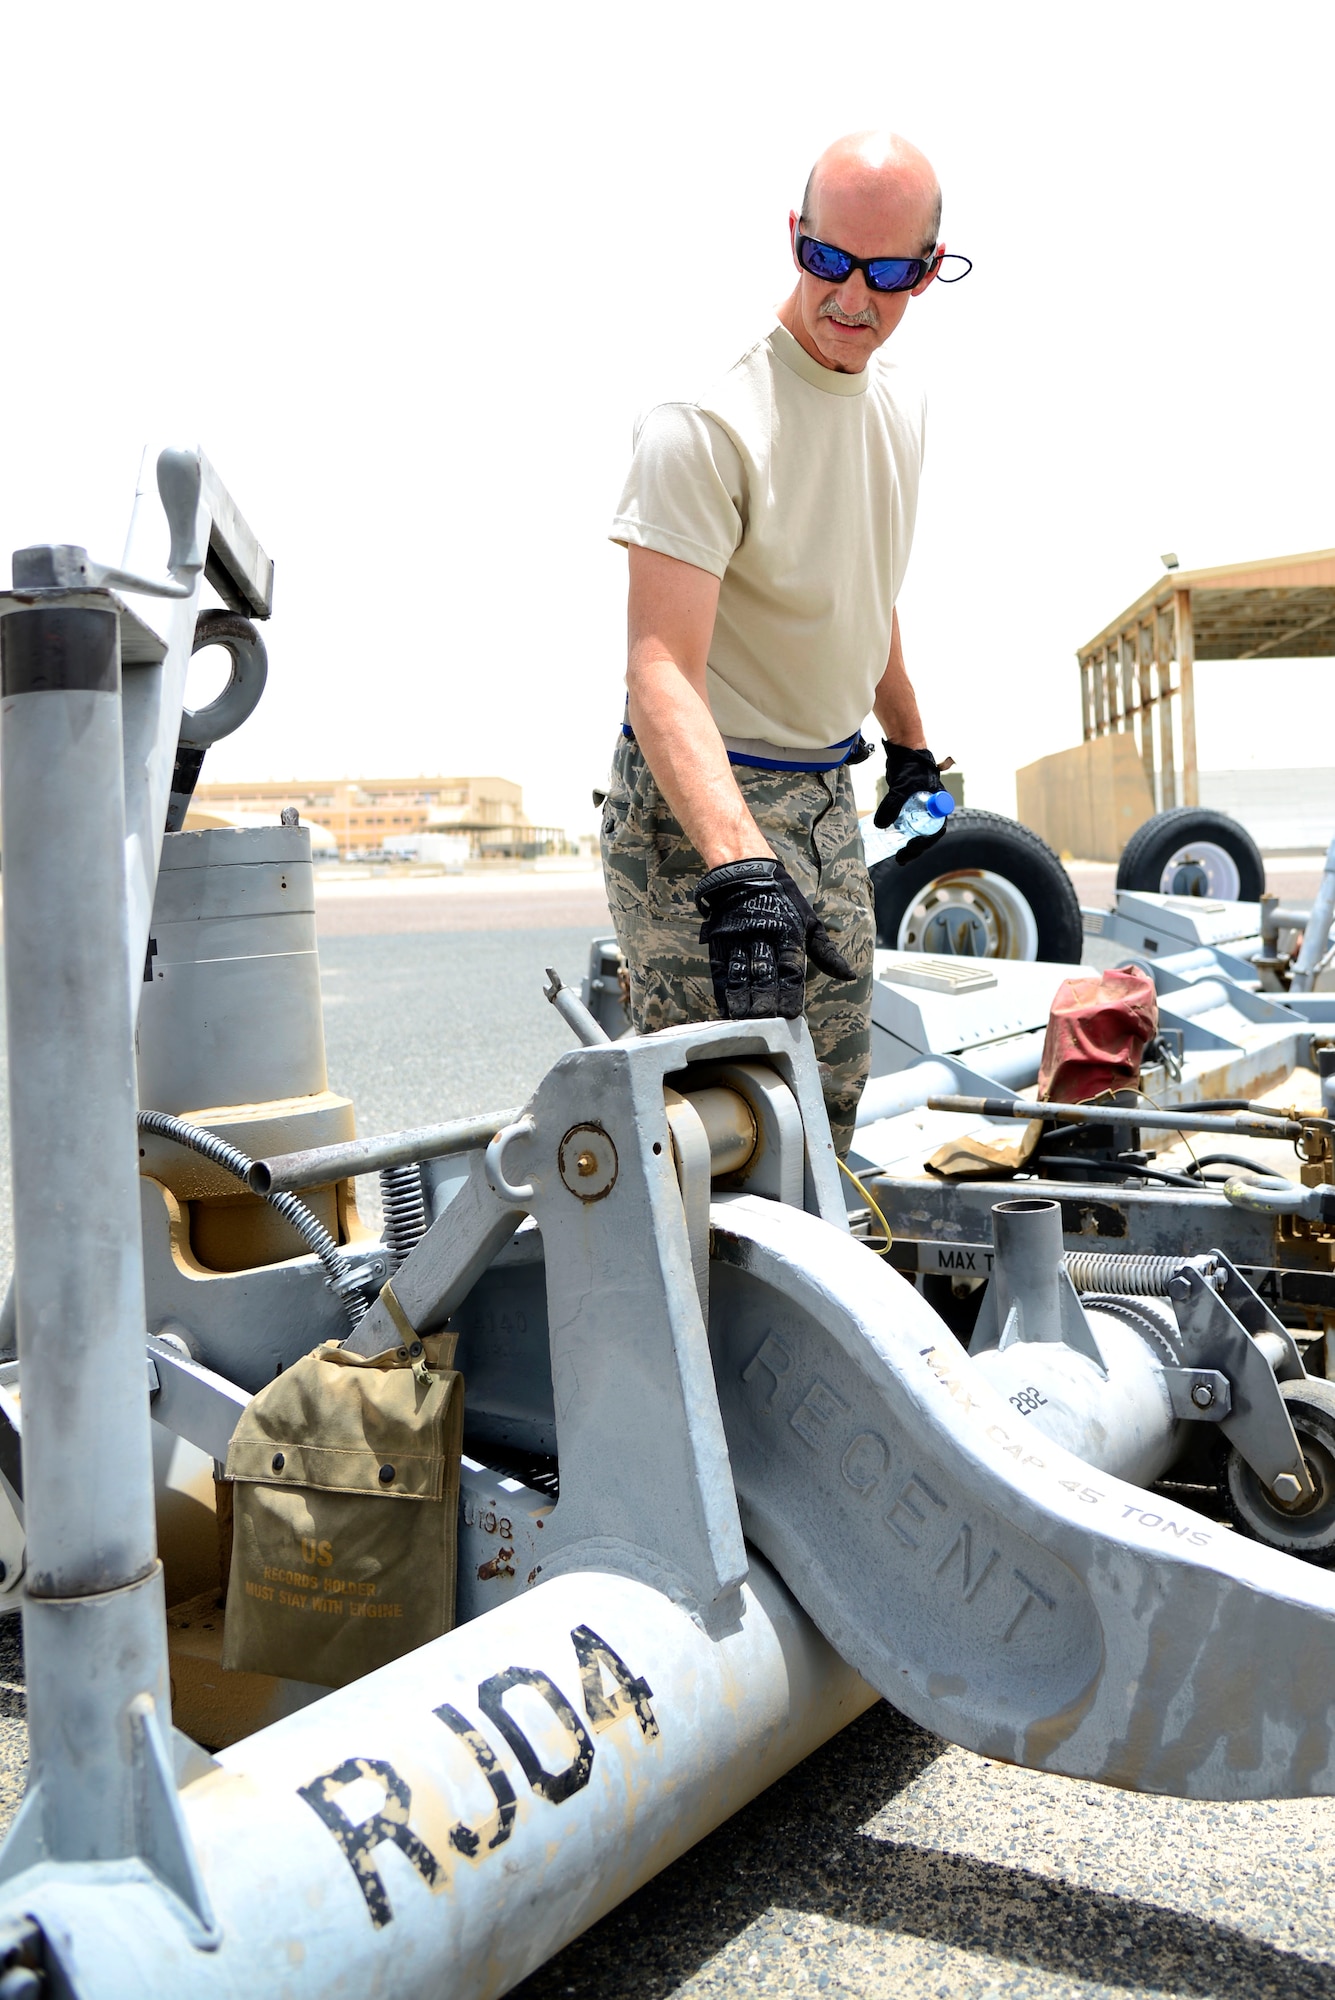 U.S. Air Force Tech. Sgt. Michial Smith, a 386th Expeditionary Aircraft Maintenance Squadron Aerospace Ground Equipment technician, conducts a shift-change equipment check at an undisclosed location in Southwest Asia, June 11, 2015. Smith, who deployed with his son, work in the same office, but on different shifts. (U.S. Air Force photo by Senior Airman Racheal E. Watson/Released)